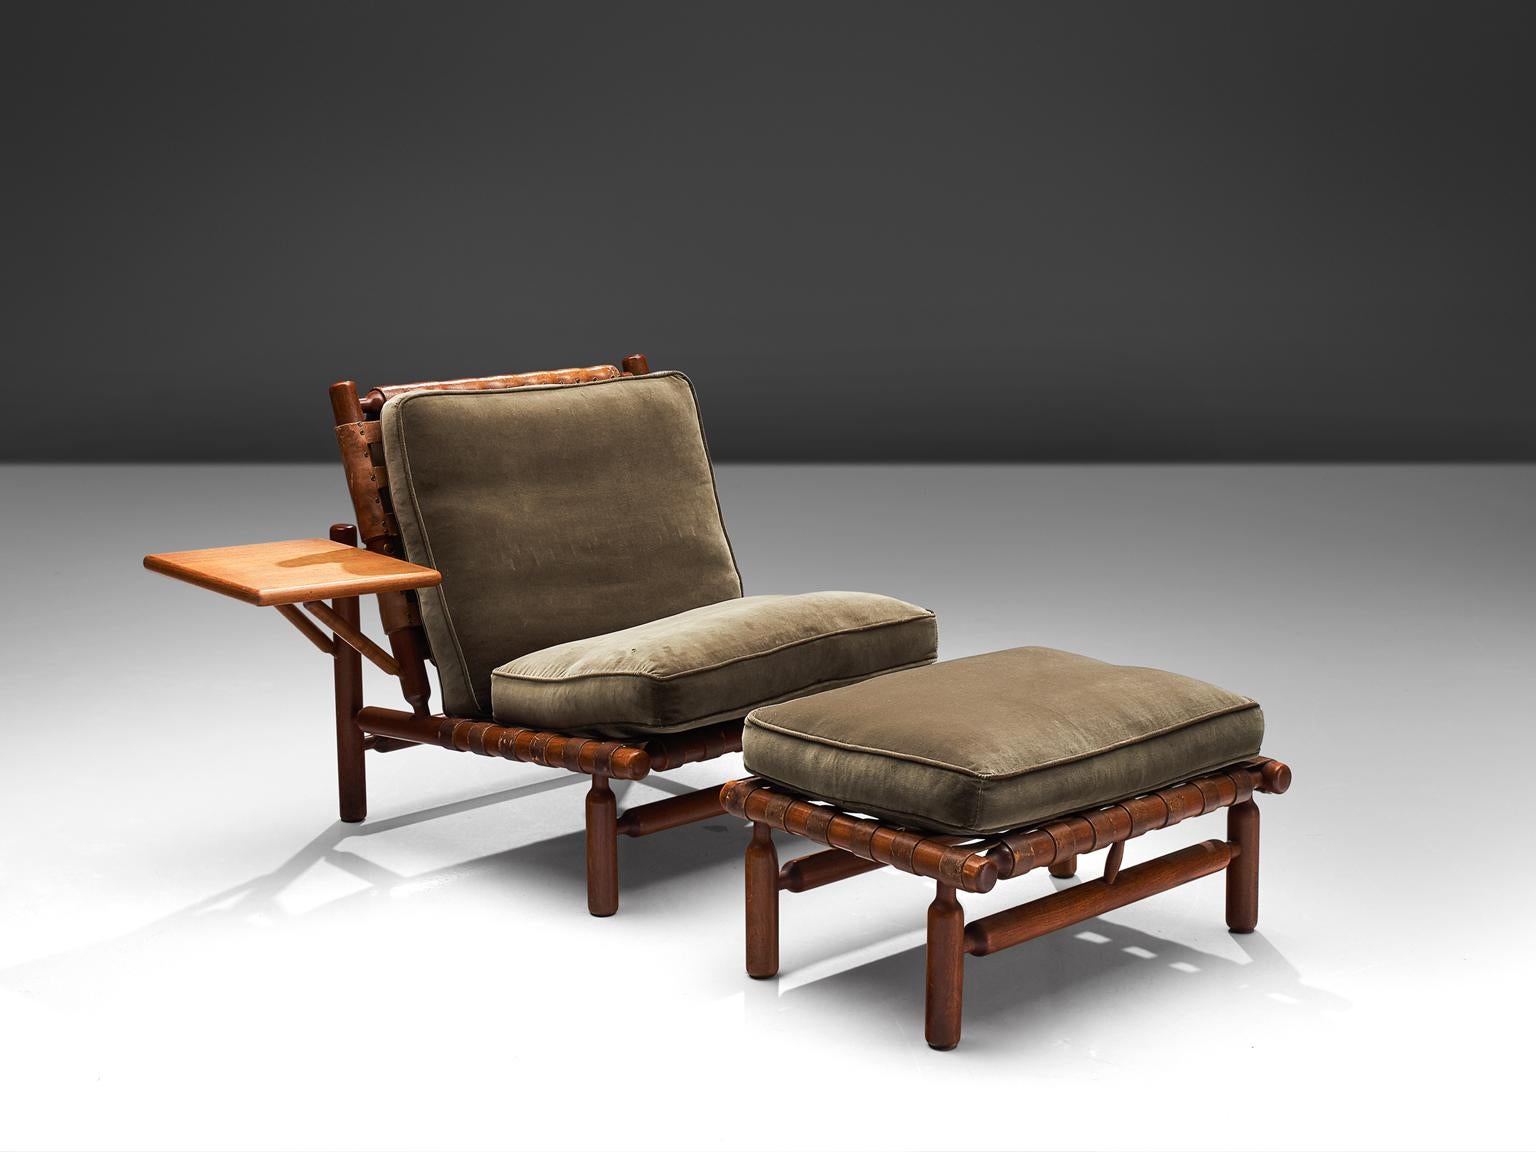 Ilmari Tapiovaara for Esposizione La Permanente Mobili, lounge chair and ottoman, teak and leather, Italy, 1957. 

This rare set with chair and ottoman are designed by the Finnish designer Ilmari Tapiovaara. This organic design features beautiful